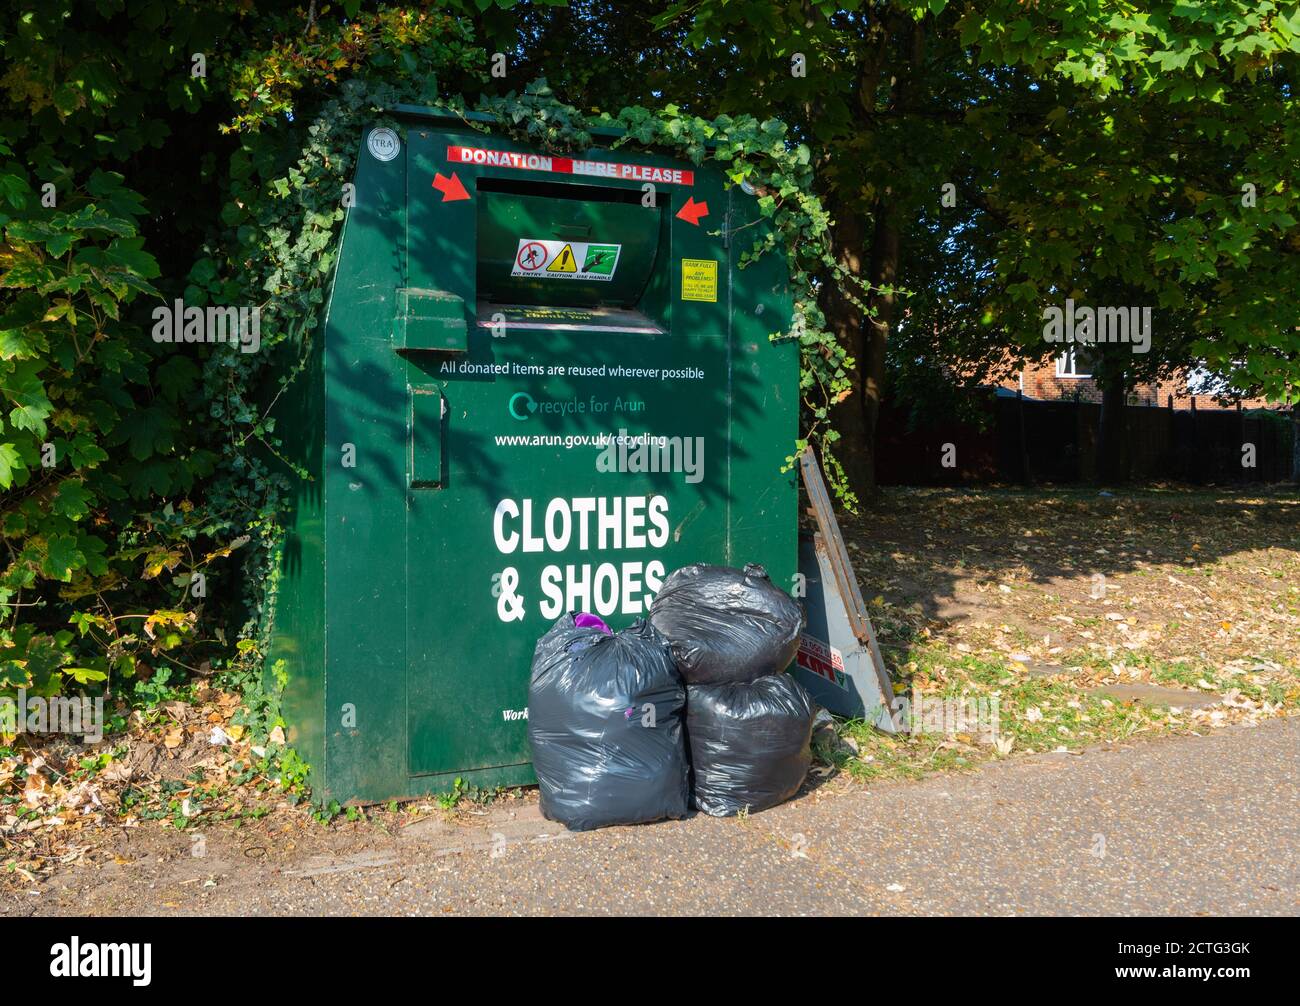 https://c8.alamy.com/comp/2CTG3GK/clothes-and-shoes-charity-donation-recycling-bin-in-west-sussex-england-uk-2CTG3GK.jpg